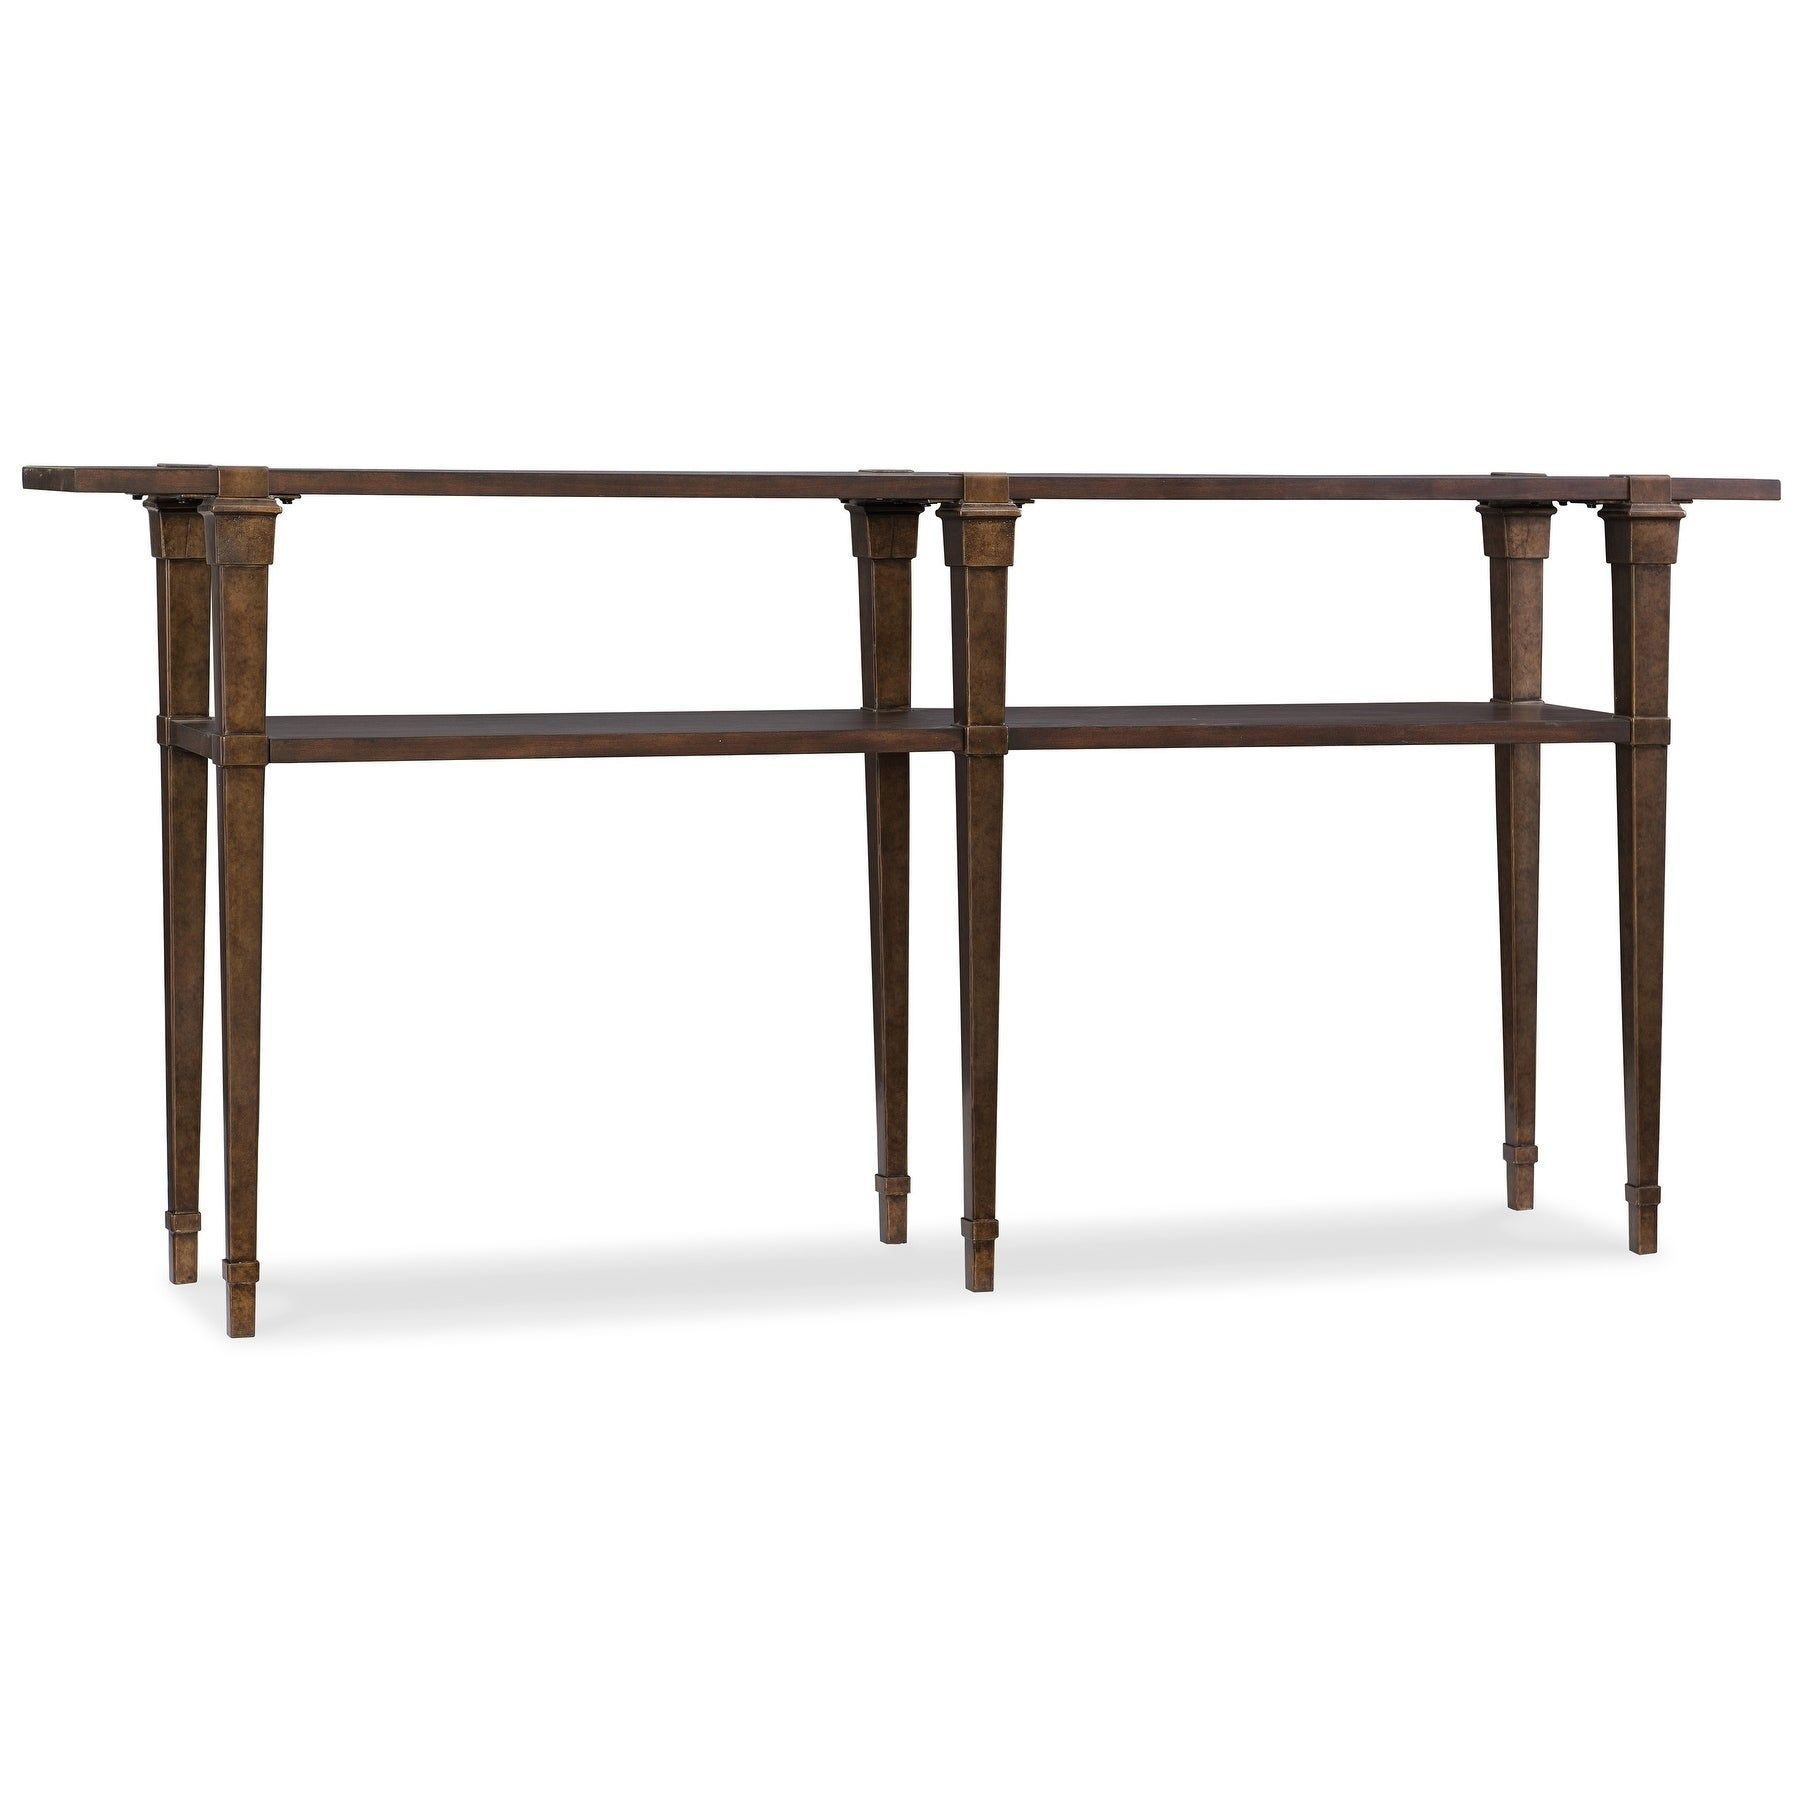 Dark Wood 6 Legs 1 Shelf Console Table, Brown | Skinny Inside 1 Shelf Console Tables (View 19 of 20)